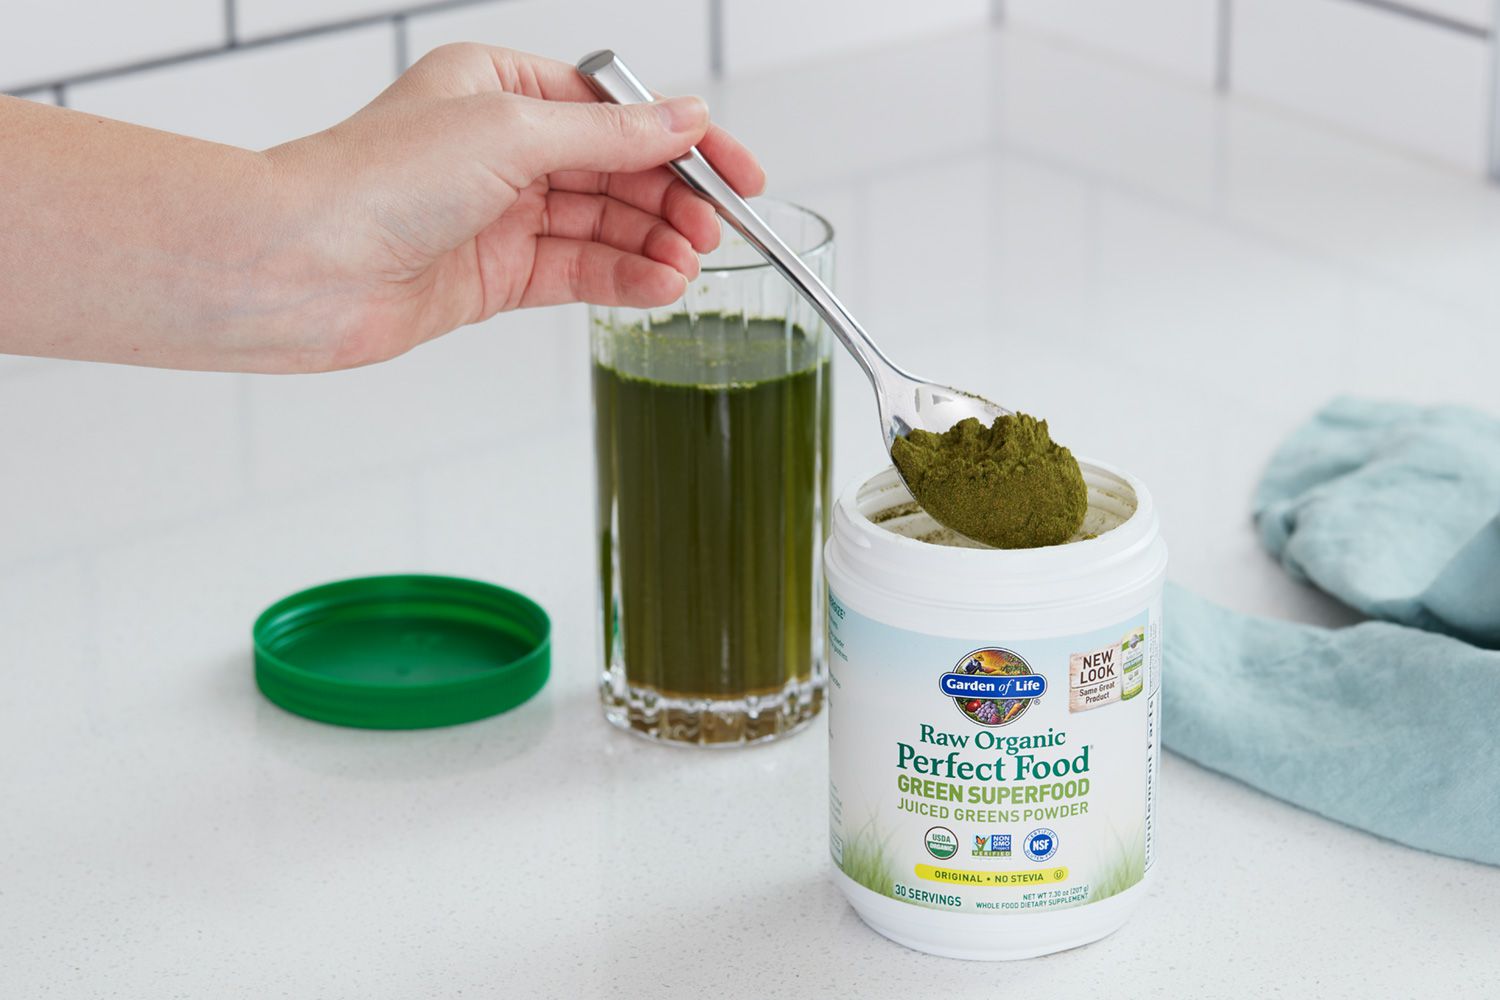 Hand holding a spoon full of Garden of Life Raw Organic Perfect Food Green Superfood powder